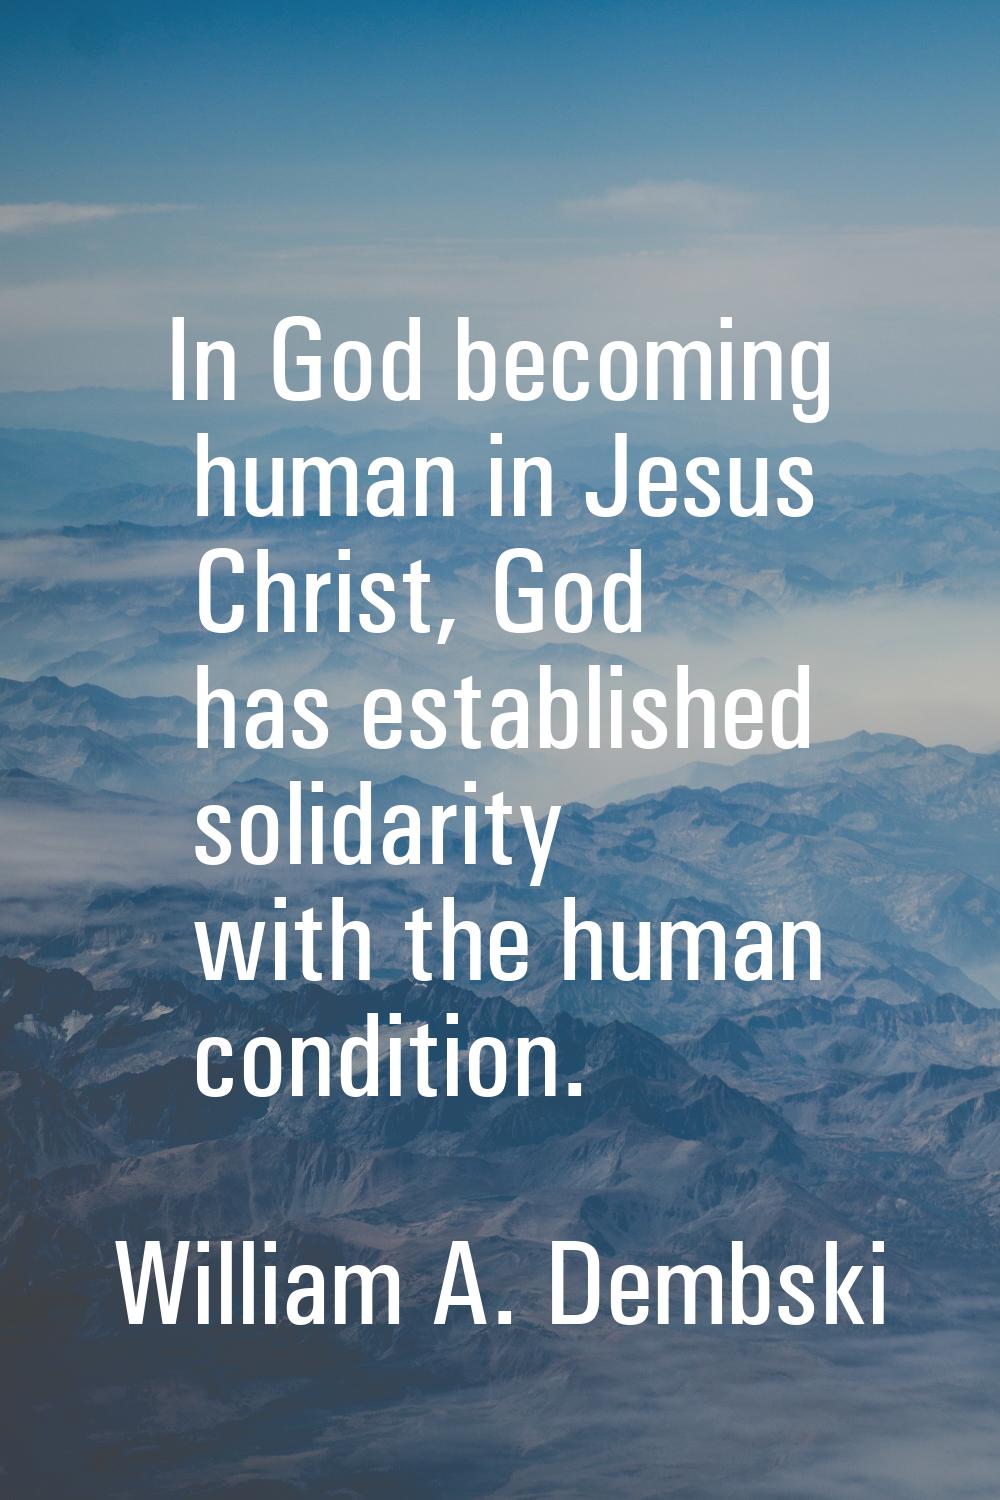 In God becoming human in Jesus Christ, God has established solidarity with the human condition.